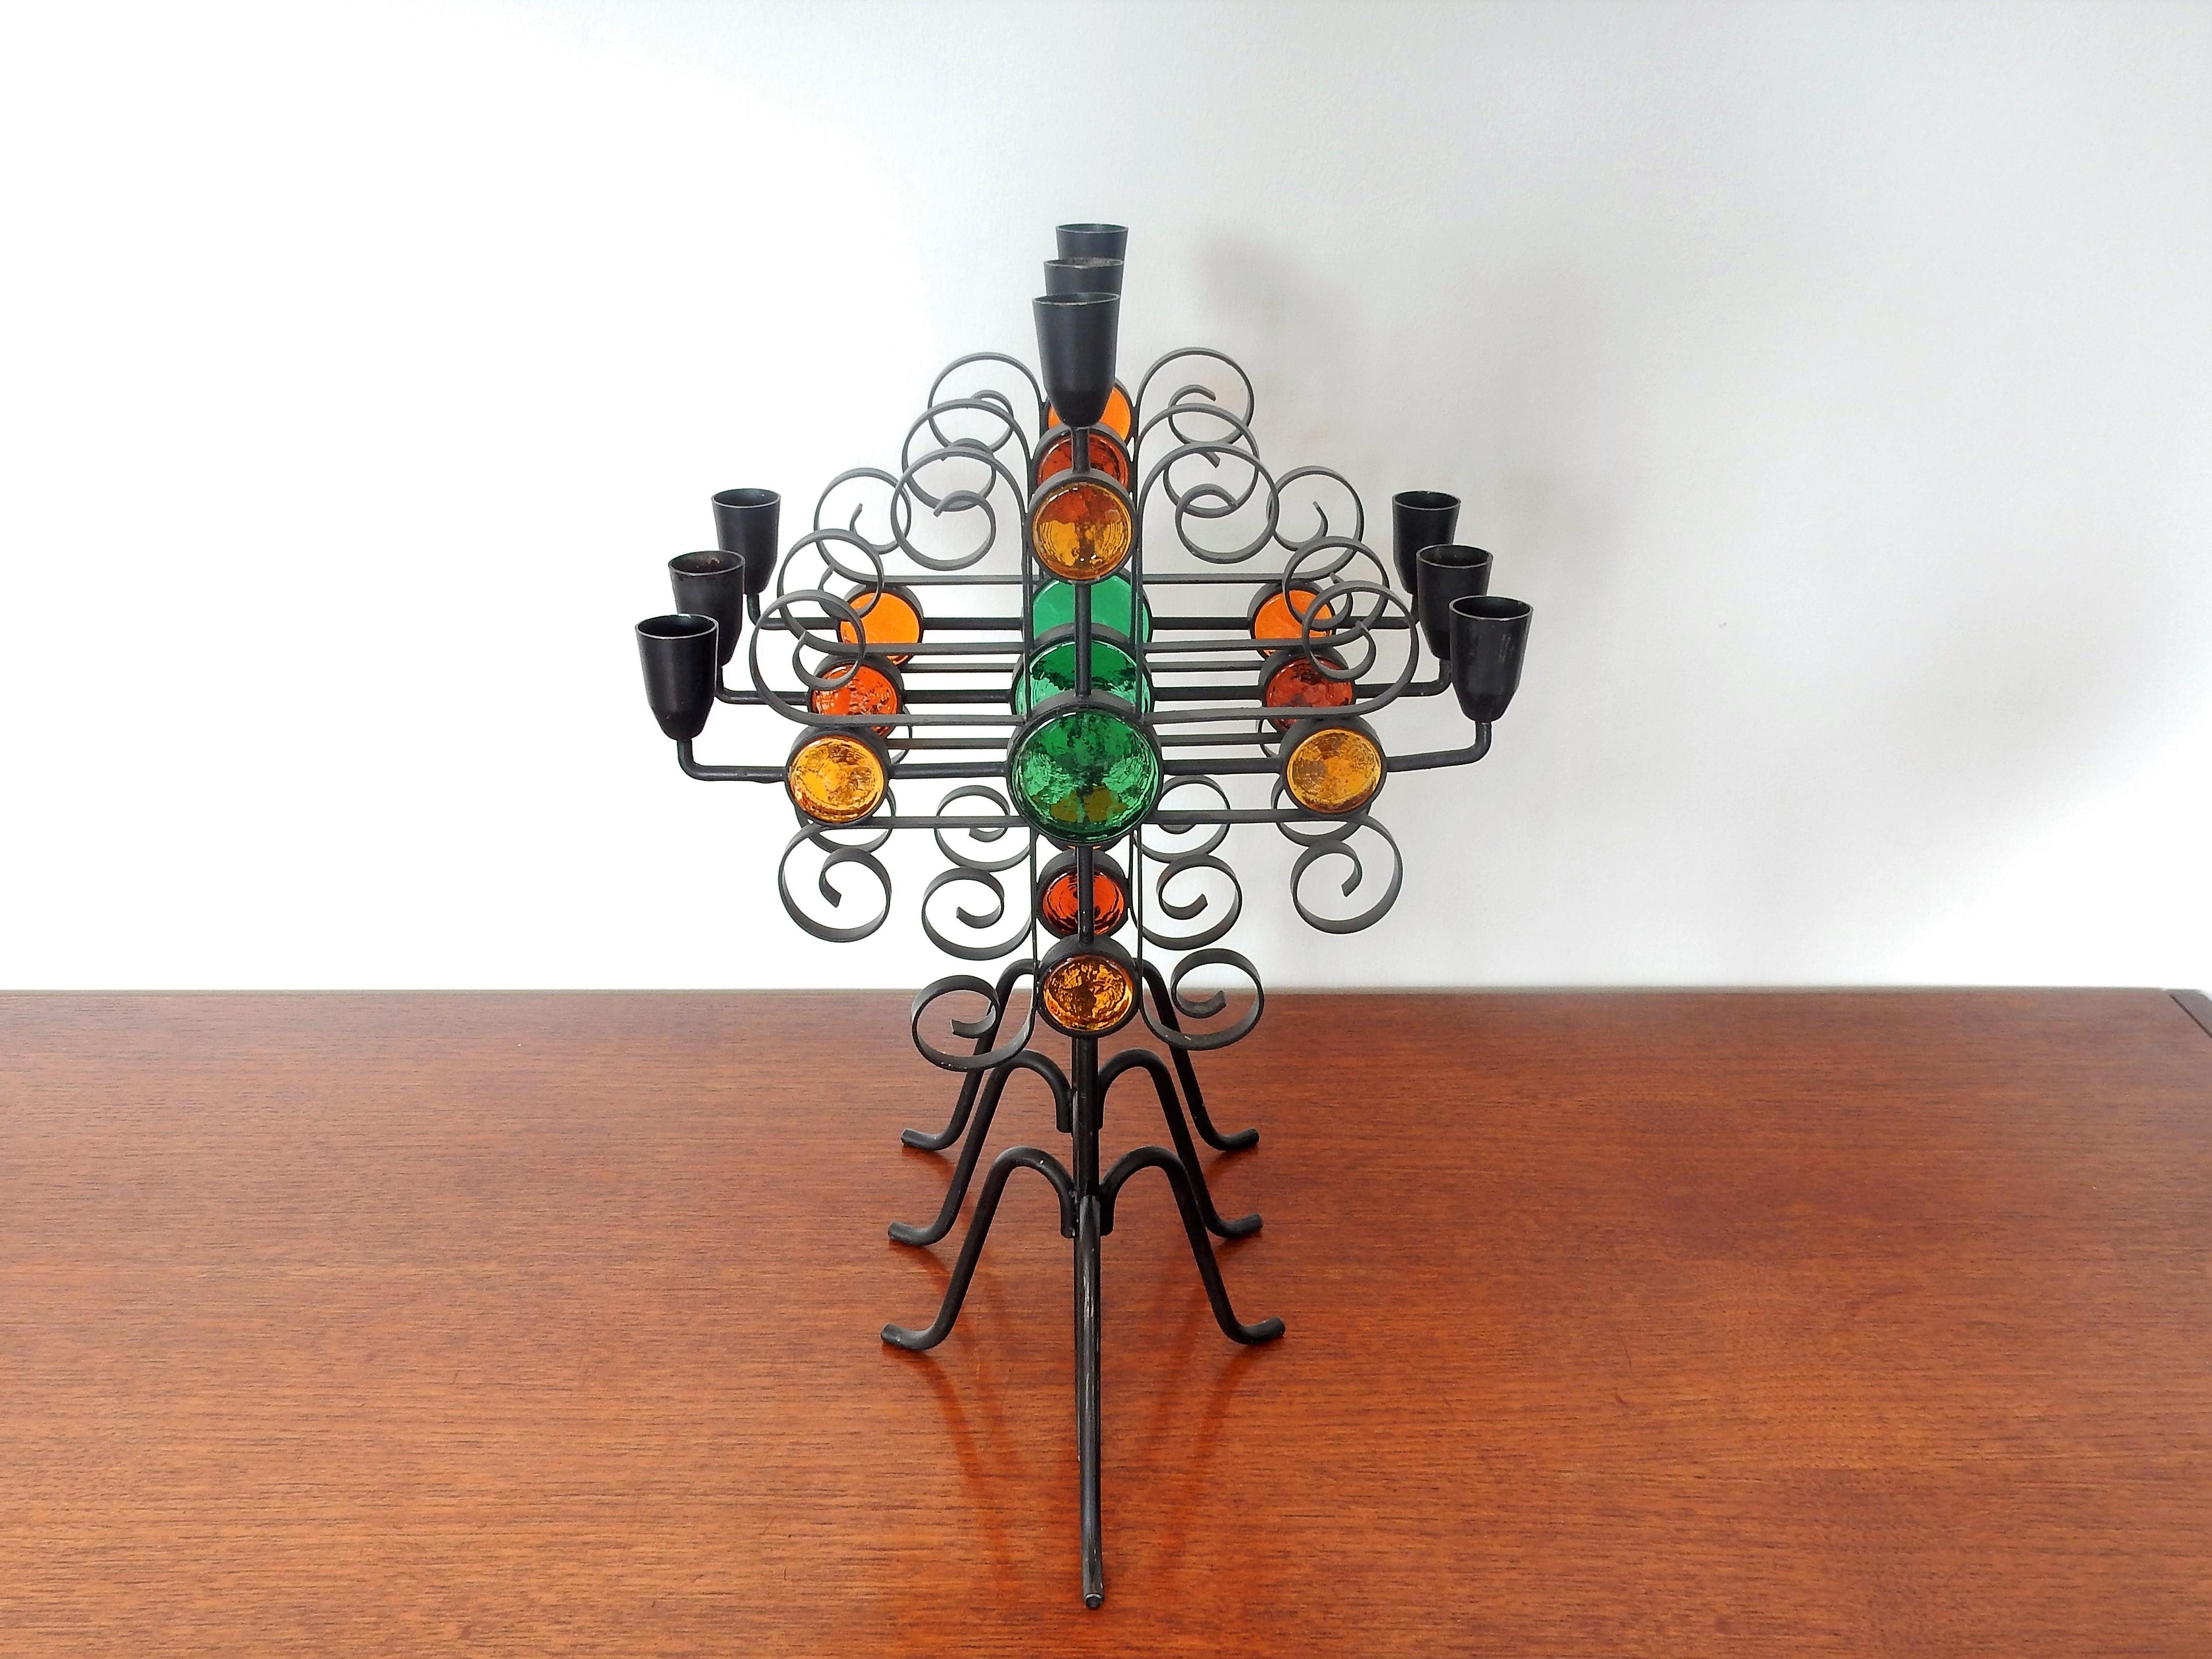 Set of 3 Wrought Iron and Glass Candelabra by Gunnar Ander for Ystad Metall In Good Condition For Sale In Steenwijk, NL